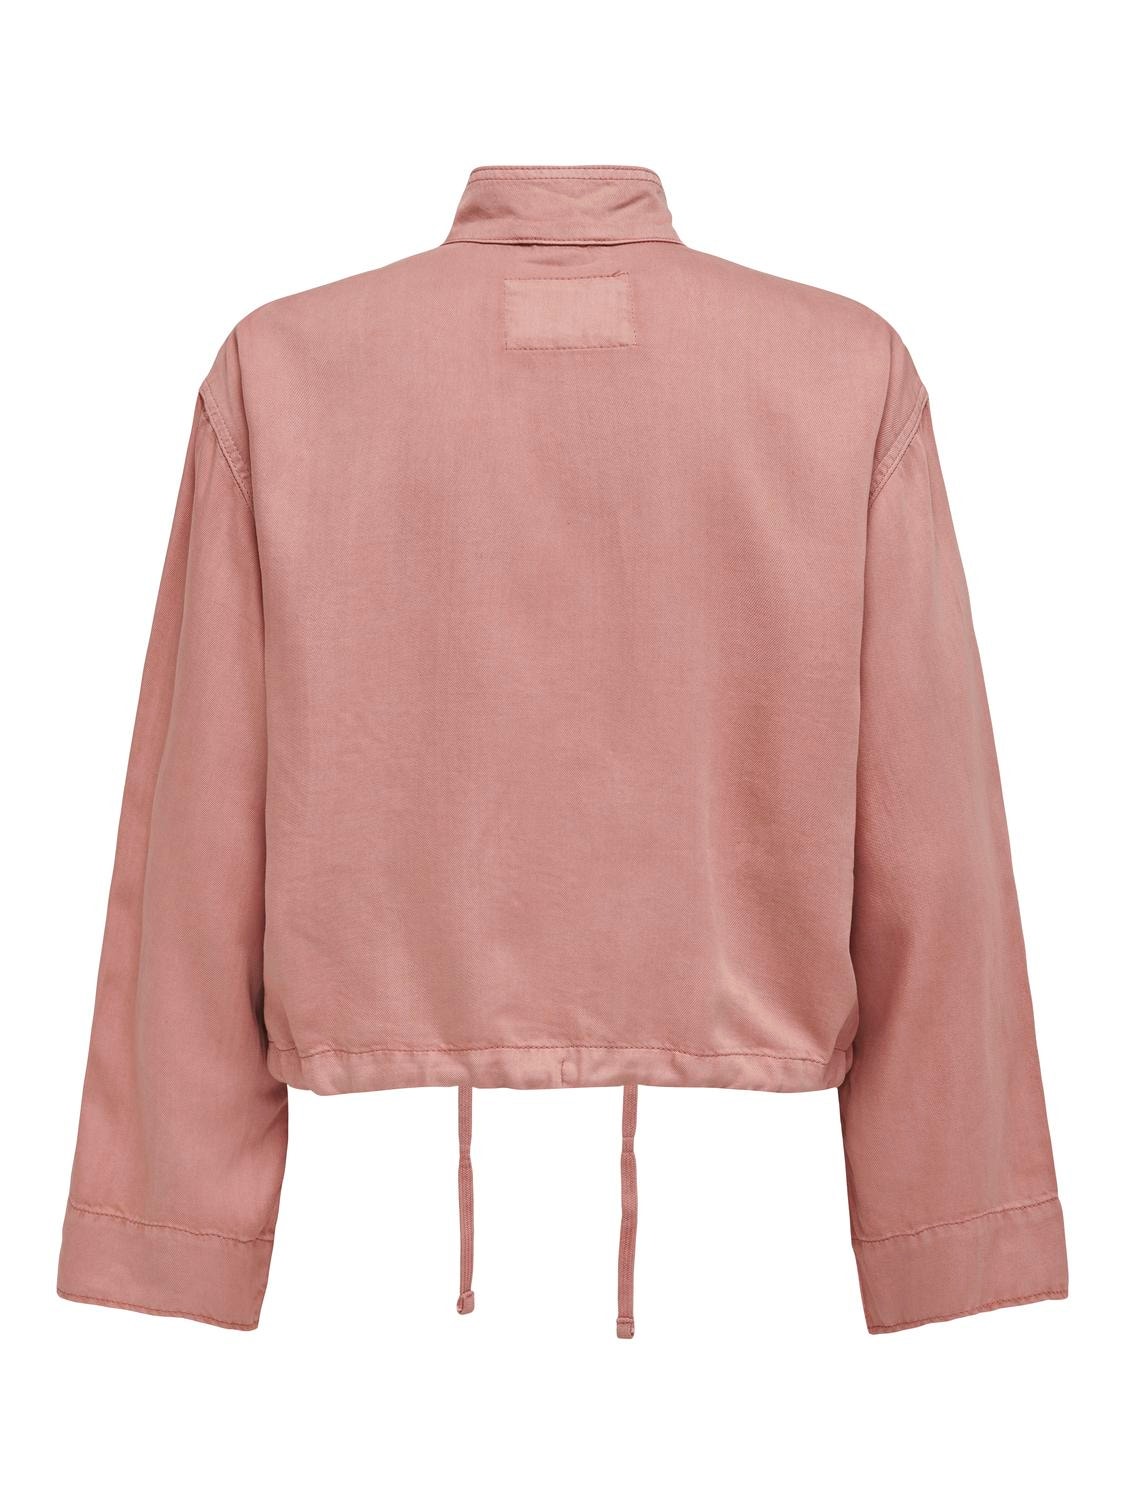 ONLY High stand-up collar Jacket -Old Rose - 15308202